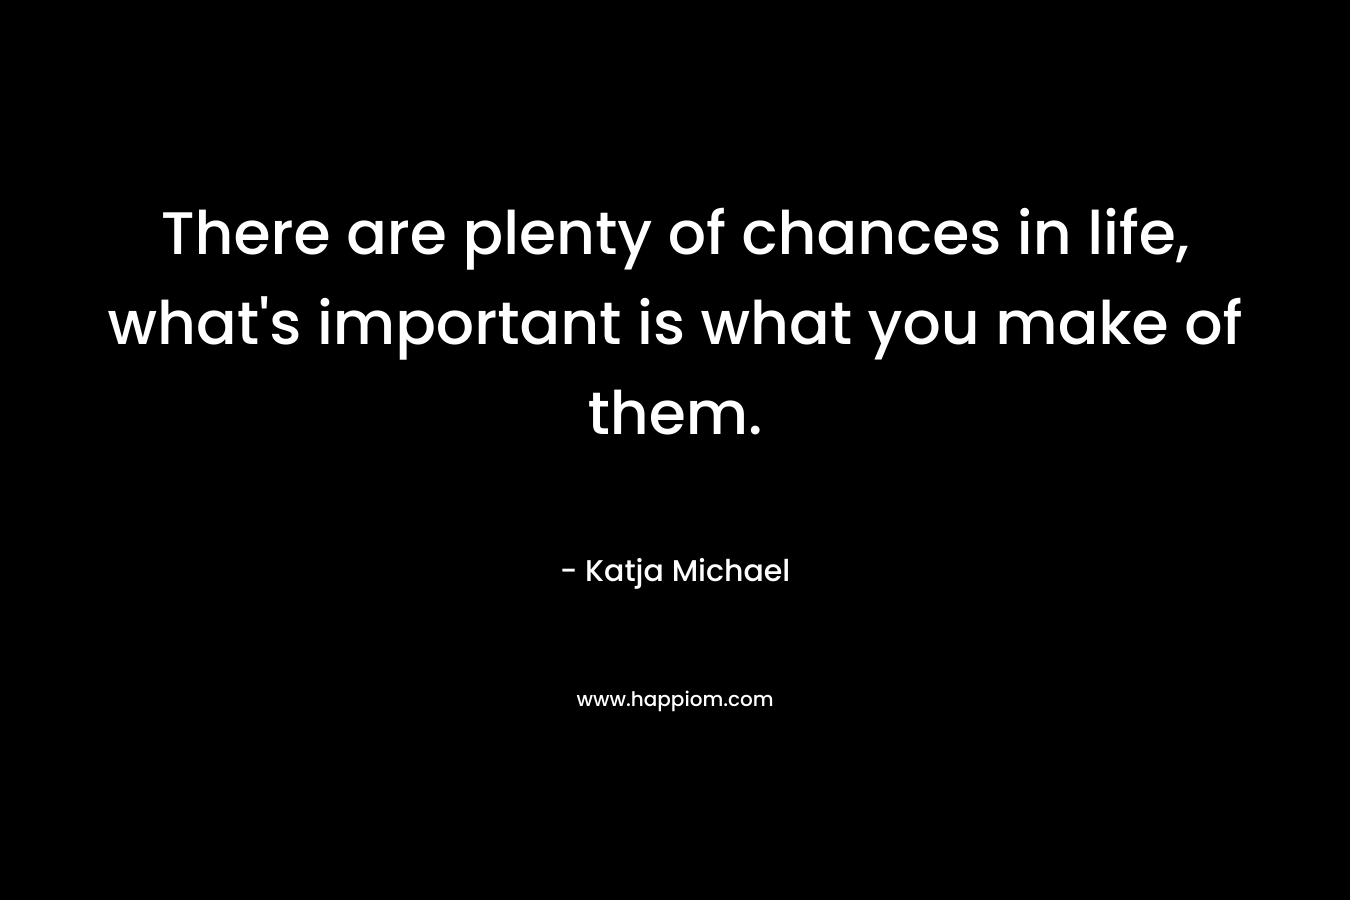 There are plenty of chances in life, what’s important is what you make of them. – Katja Michael